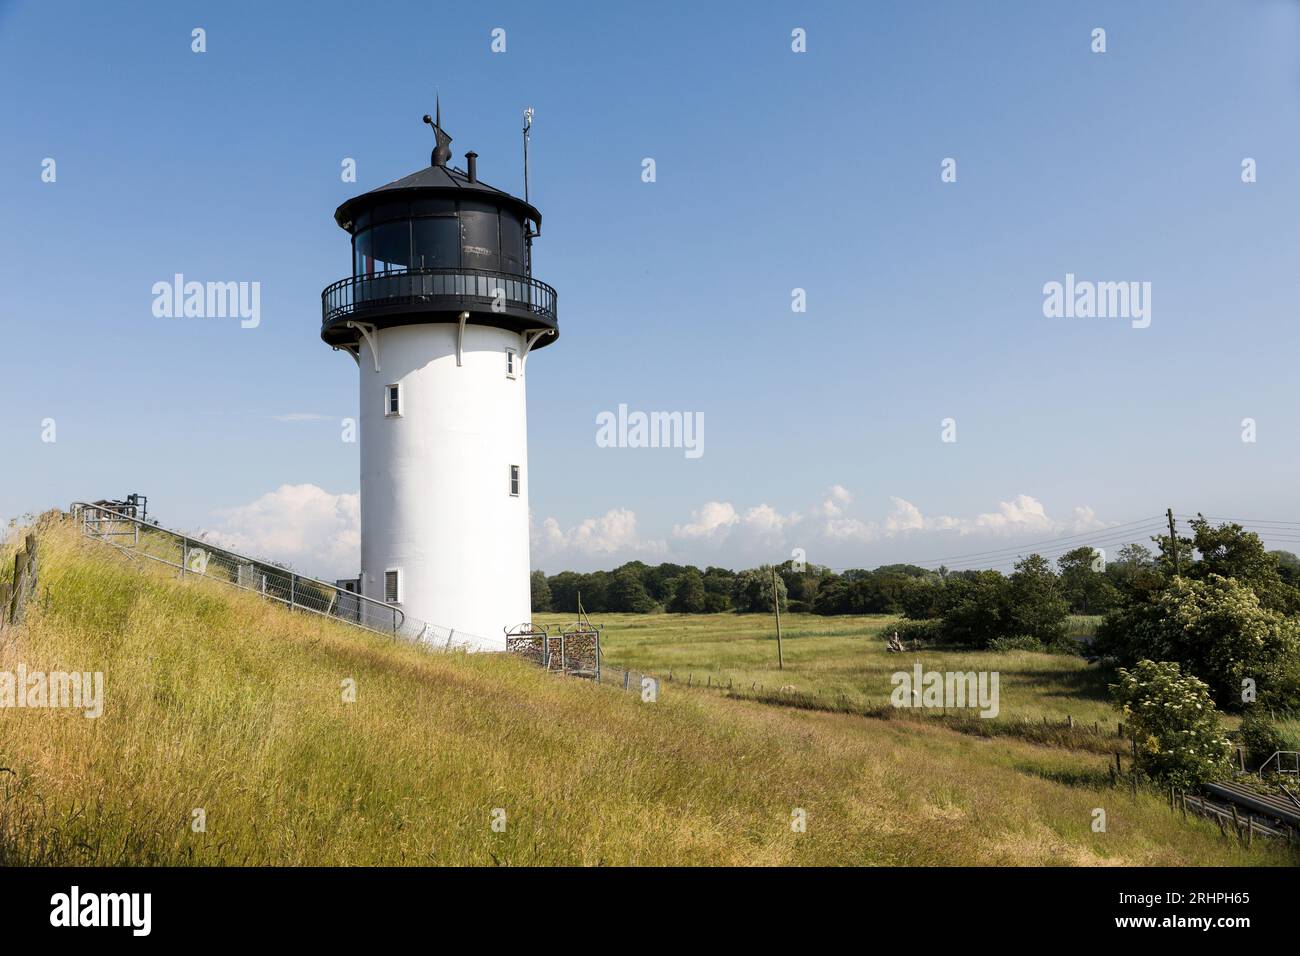 Berta, Dicke phare Altenbruch, Cuxhaven, Basse-Saxe, Allemagne Banque D'Images